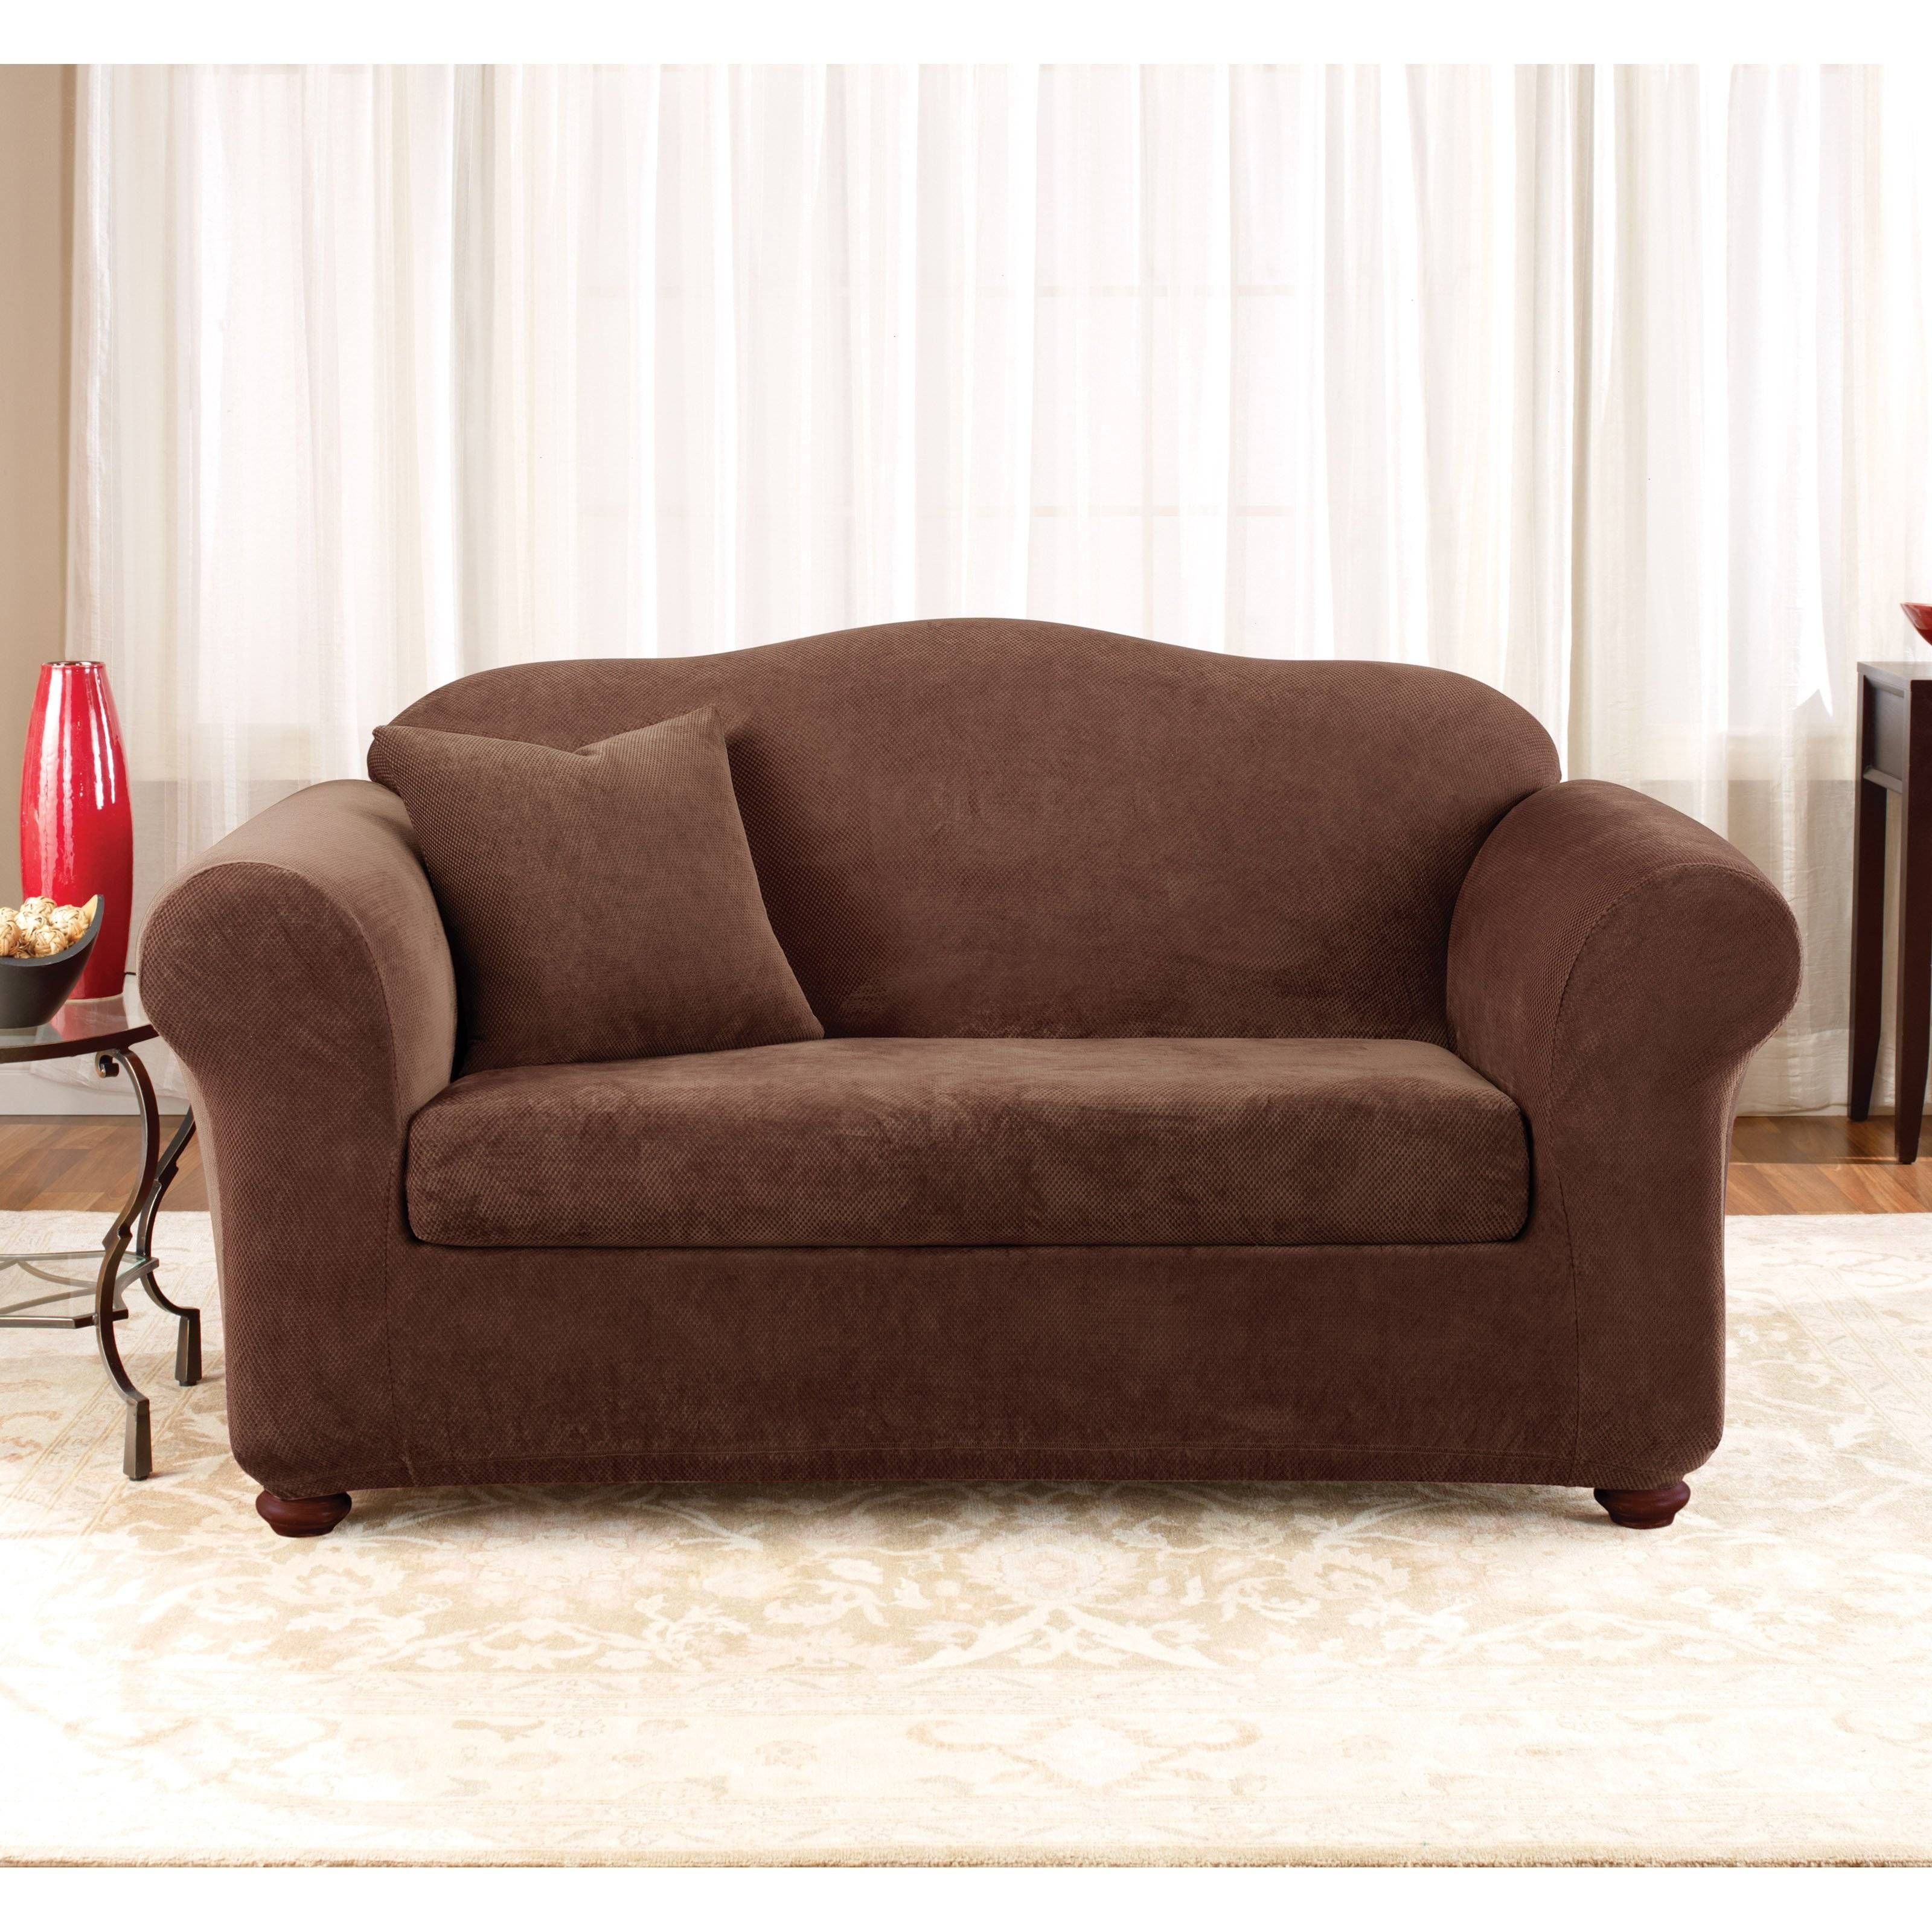 Furniture: Walmart Slipcovers | Slipcovers For Sofas And Loveseats Throughout Walmart Slipcovers For Sofas (View 13 of 30)